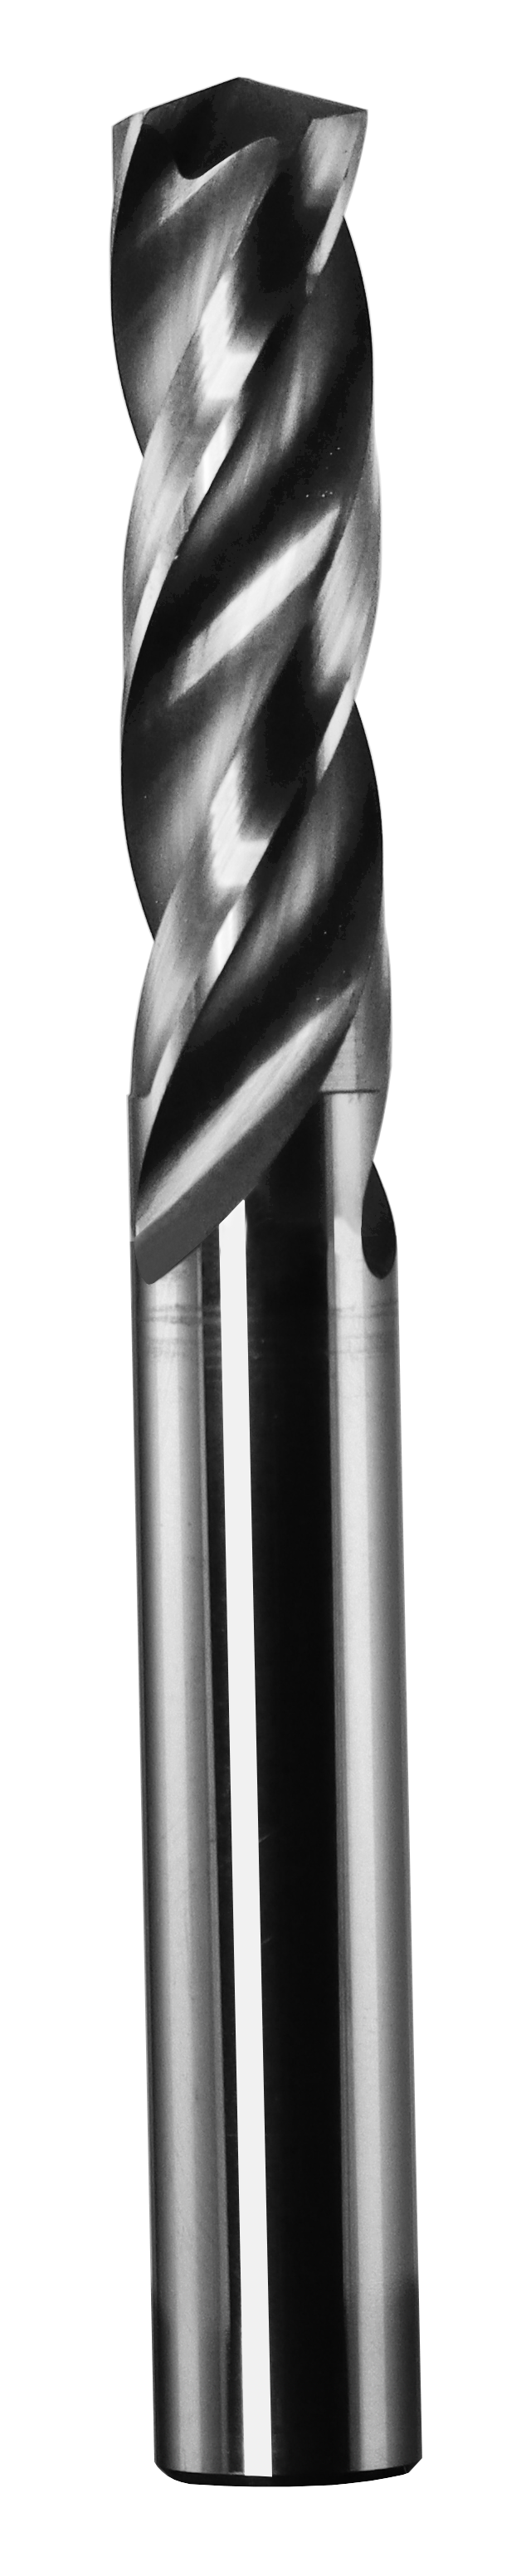 Letter K, 150 Degree Point, Solid Carbide Drill - 53211